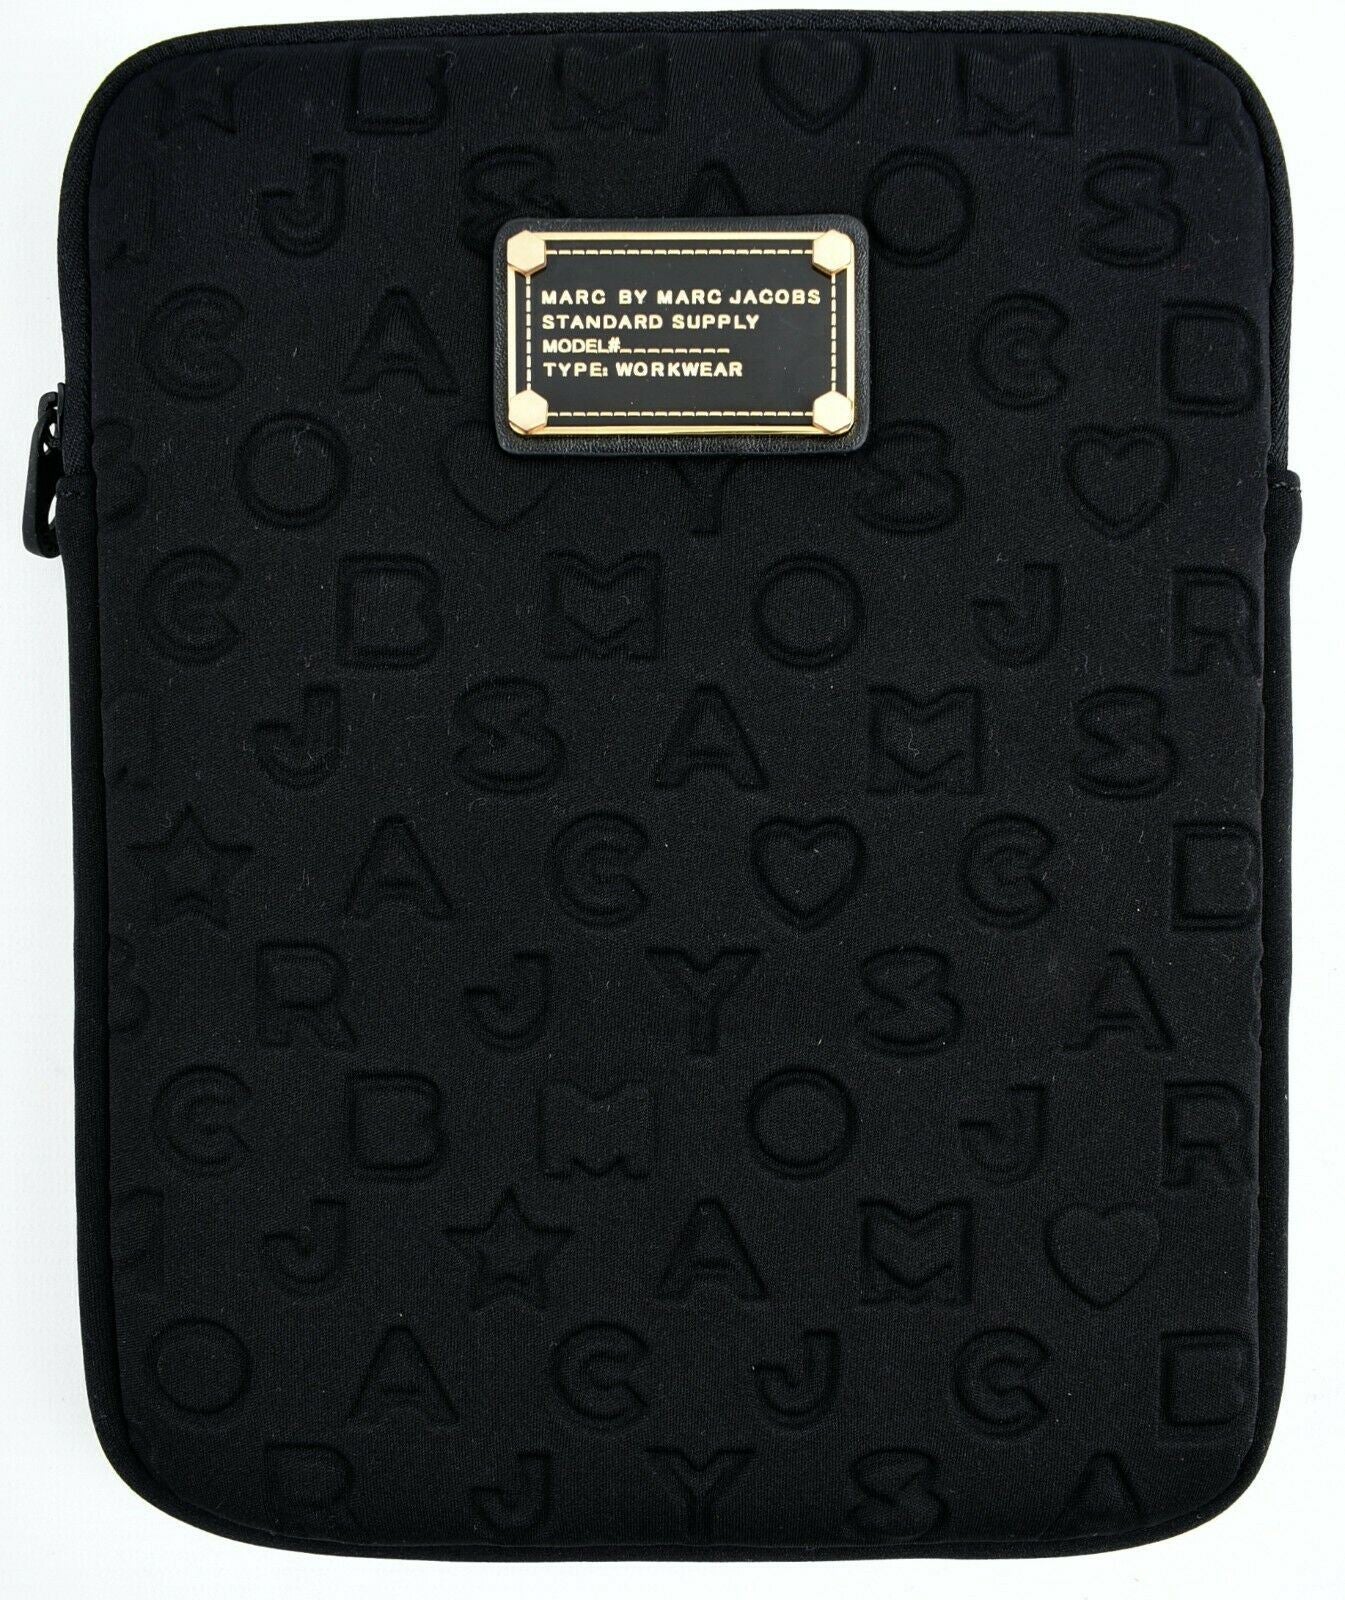 MARC by MARC JACOBS Zip Around Padded iPad Tablet Case - Black